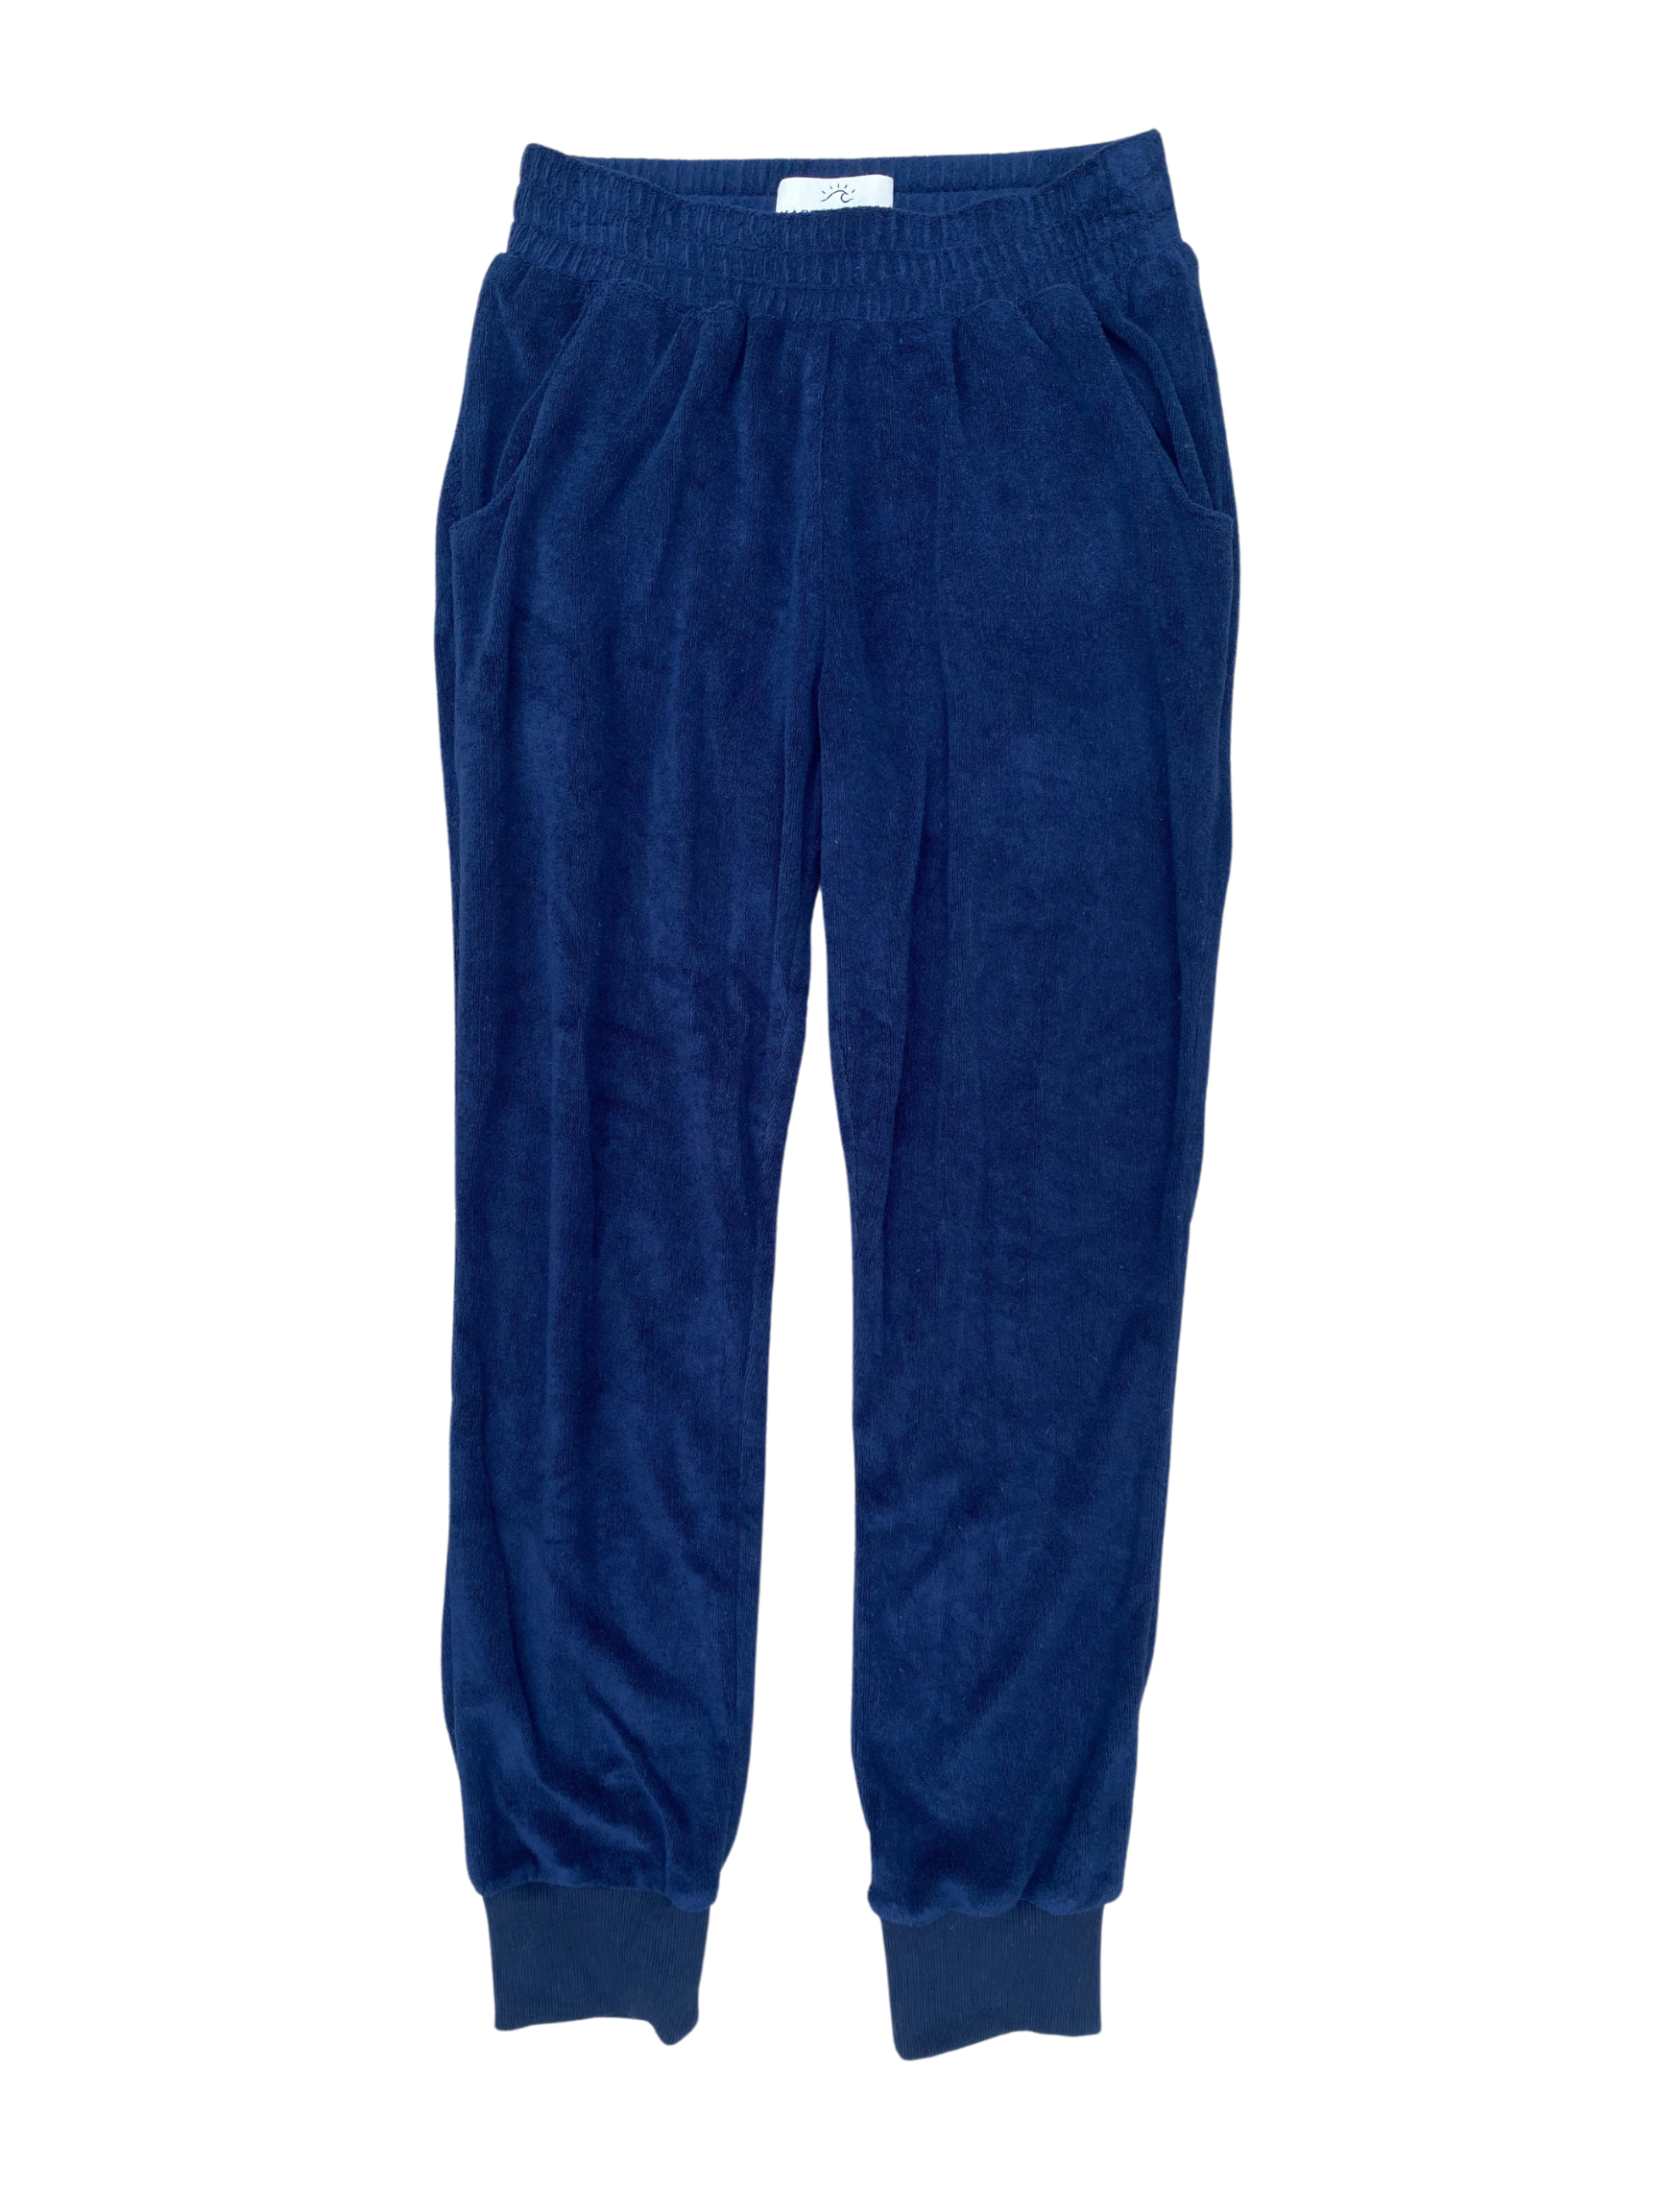 Navy Blue Terry Cloth Jogger Pant with pockets